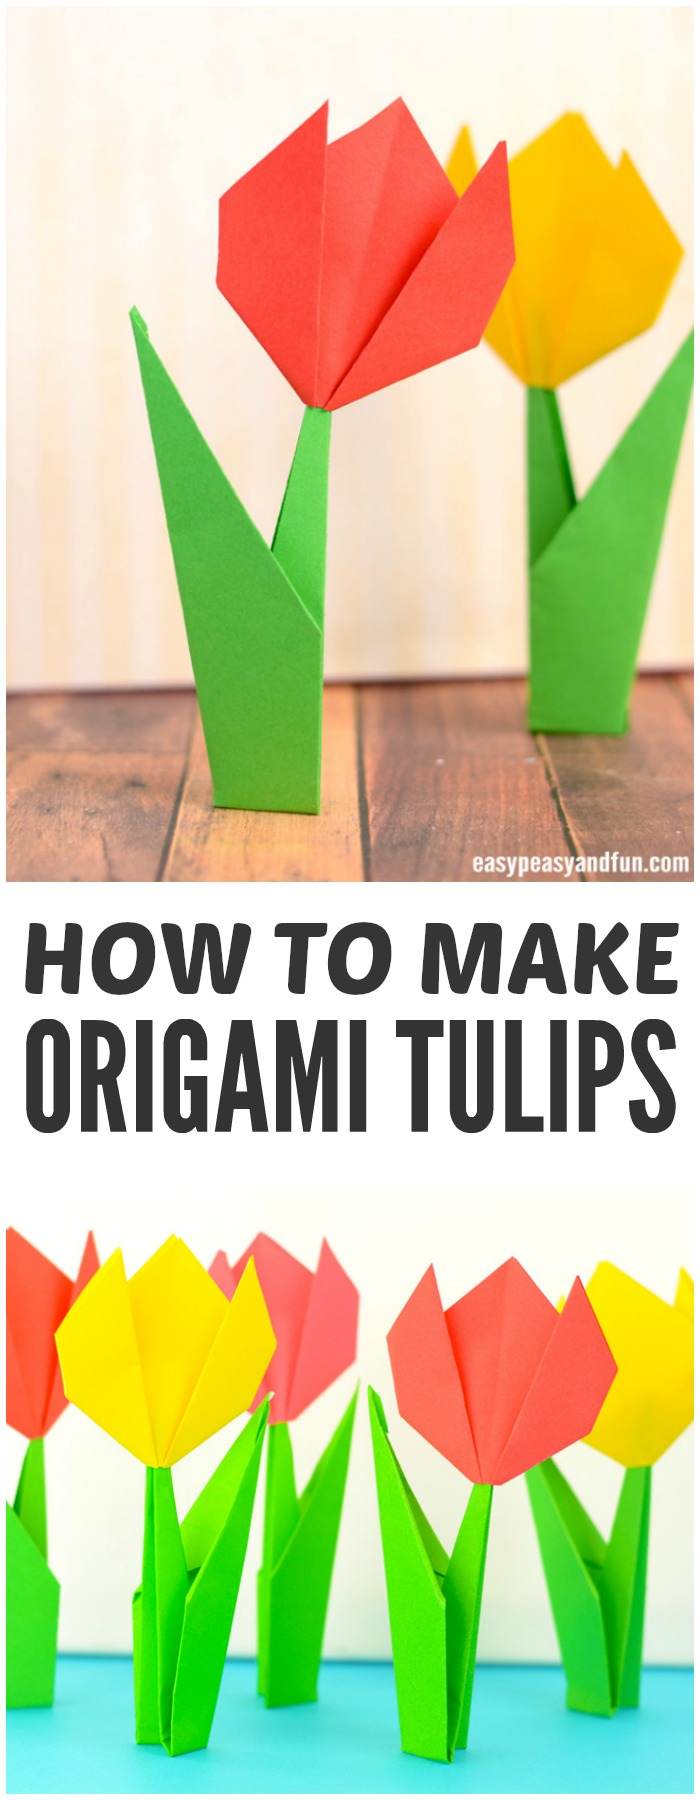 Origami Flower Tutorial How To Make Origami Flowers Origami Tulip Tutorial With Diagram